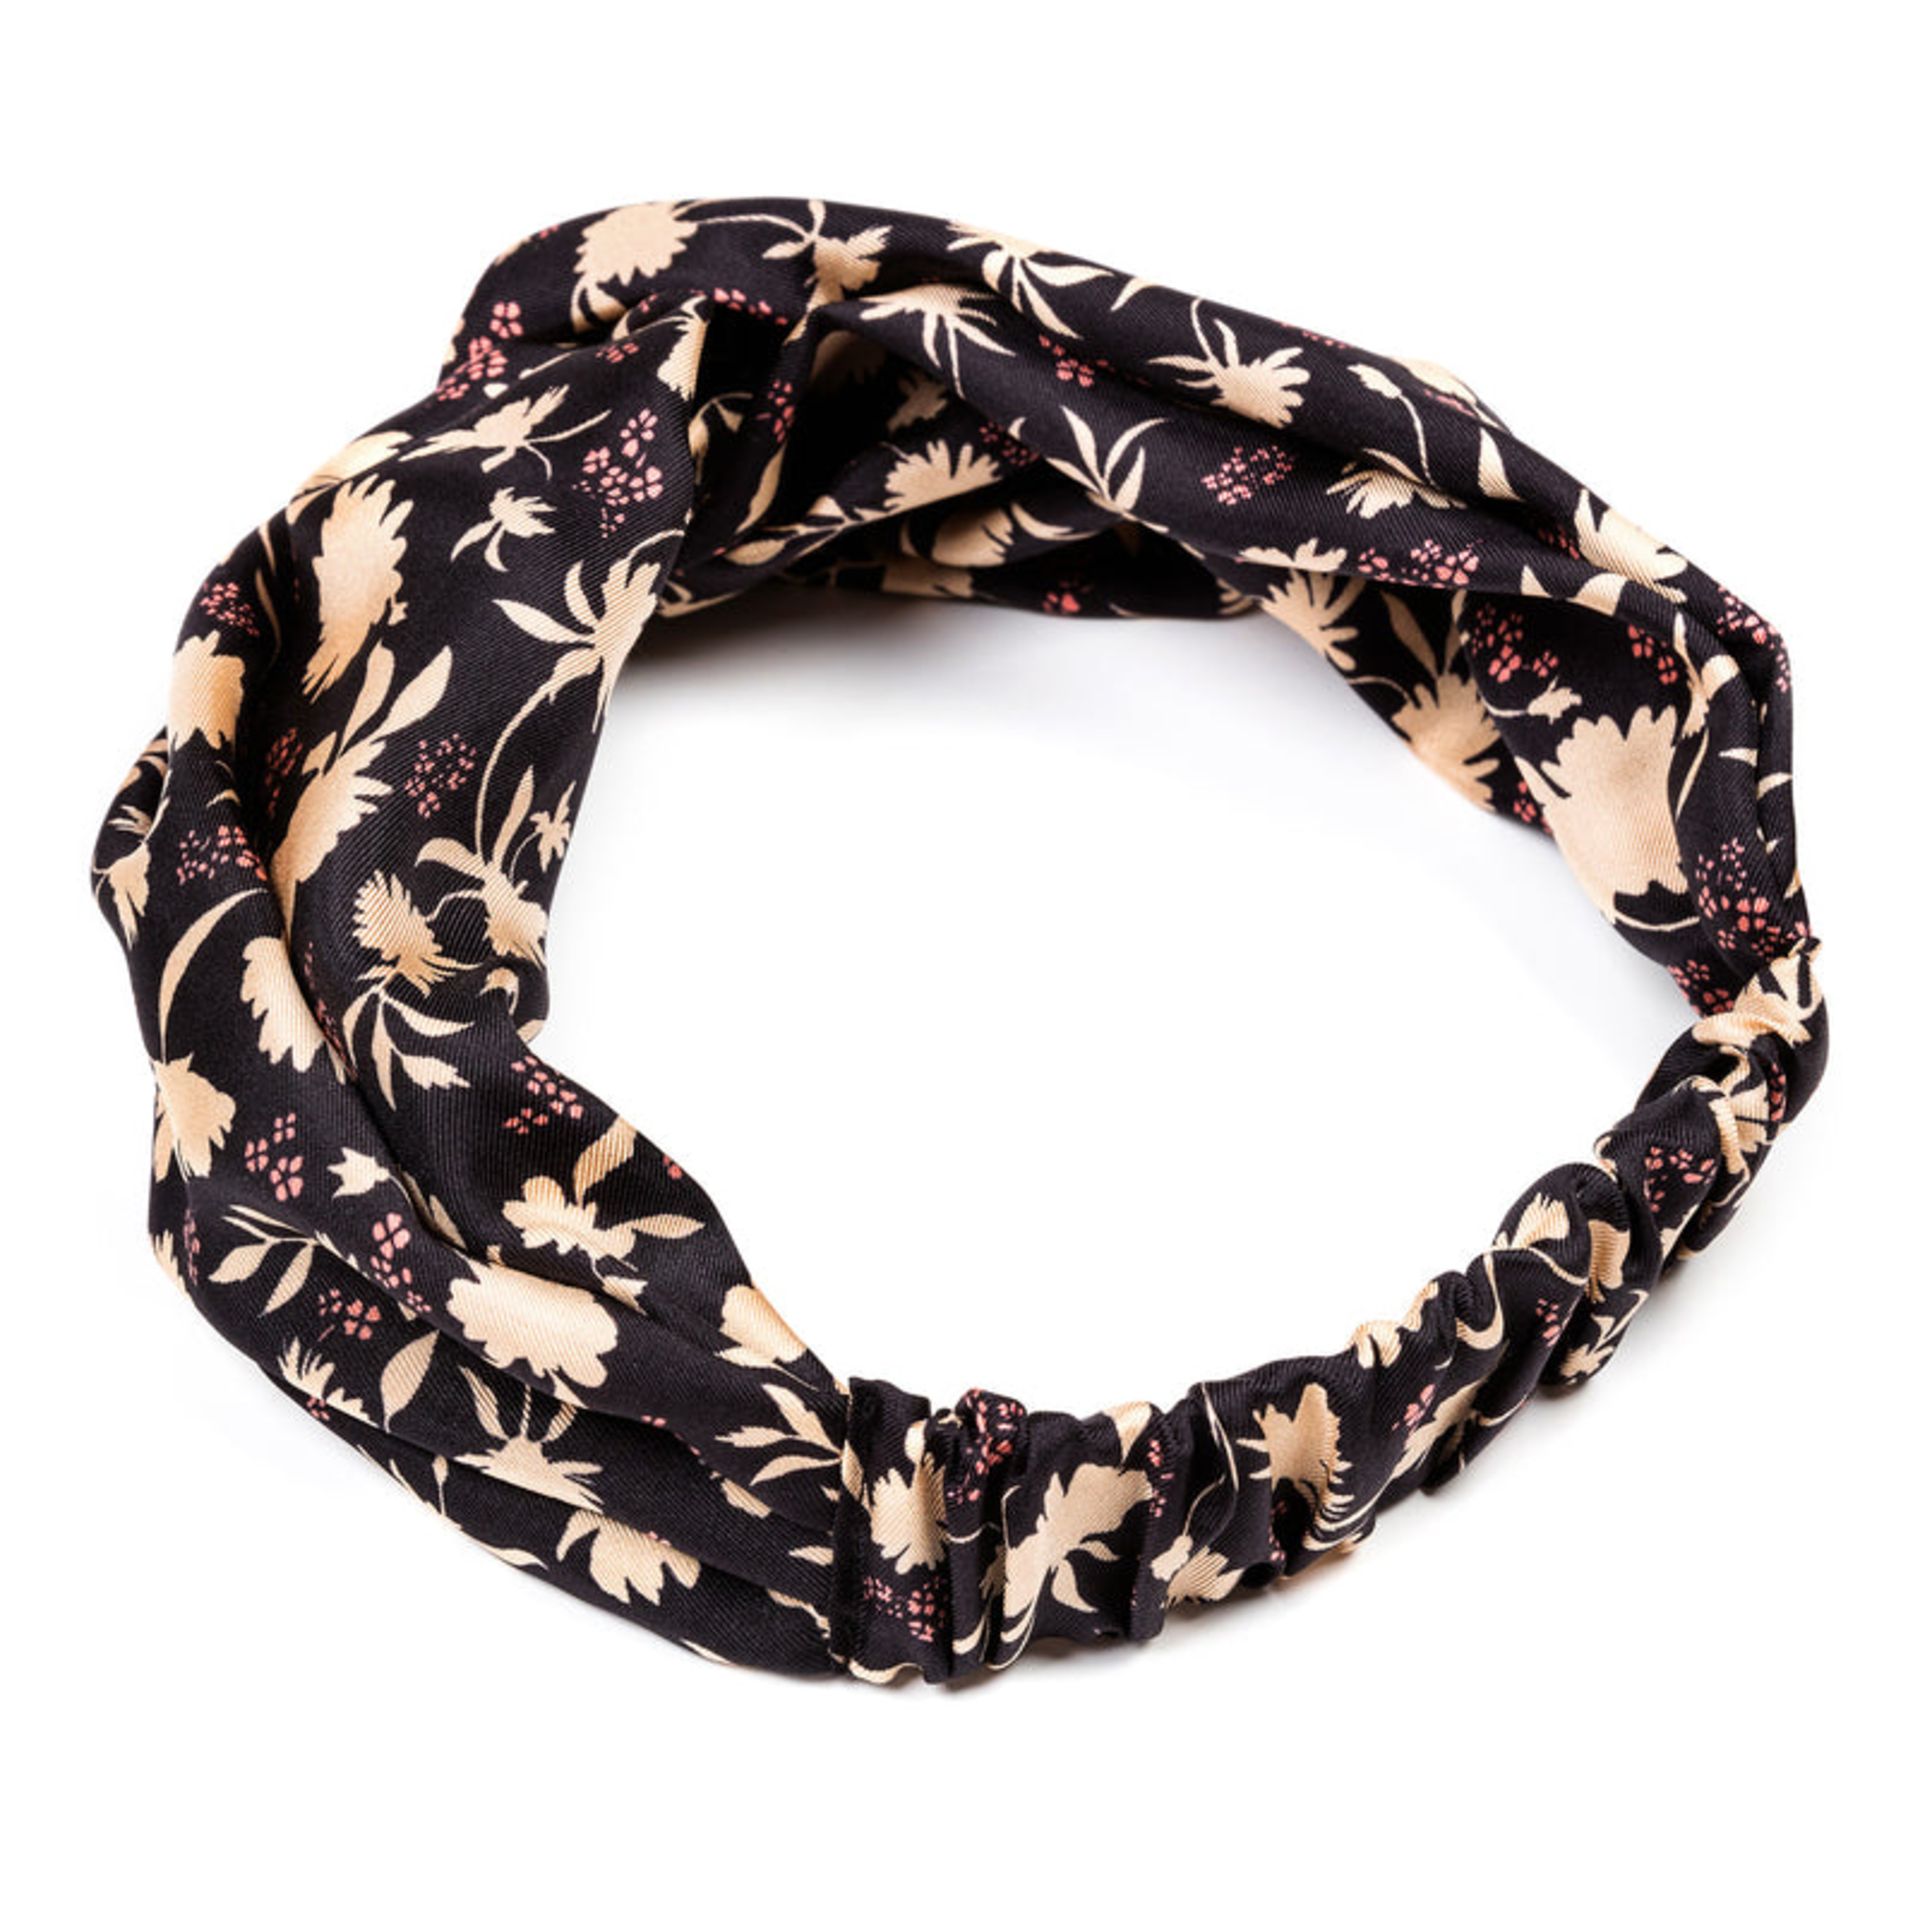 Of The Bea Silk Headband Beatrice Jenkins Floral RRP 85 About the Product(s) Drawing on the beauty